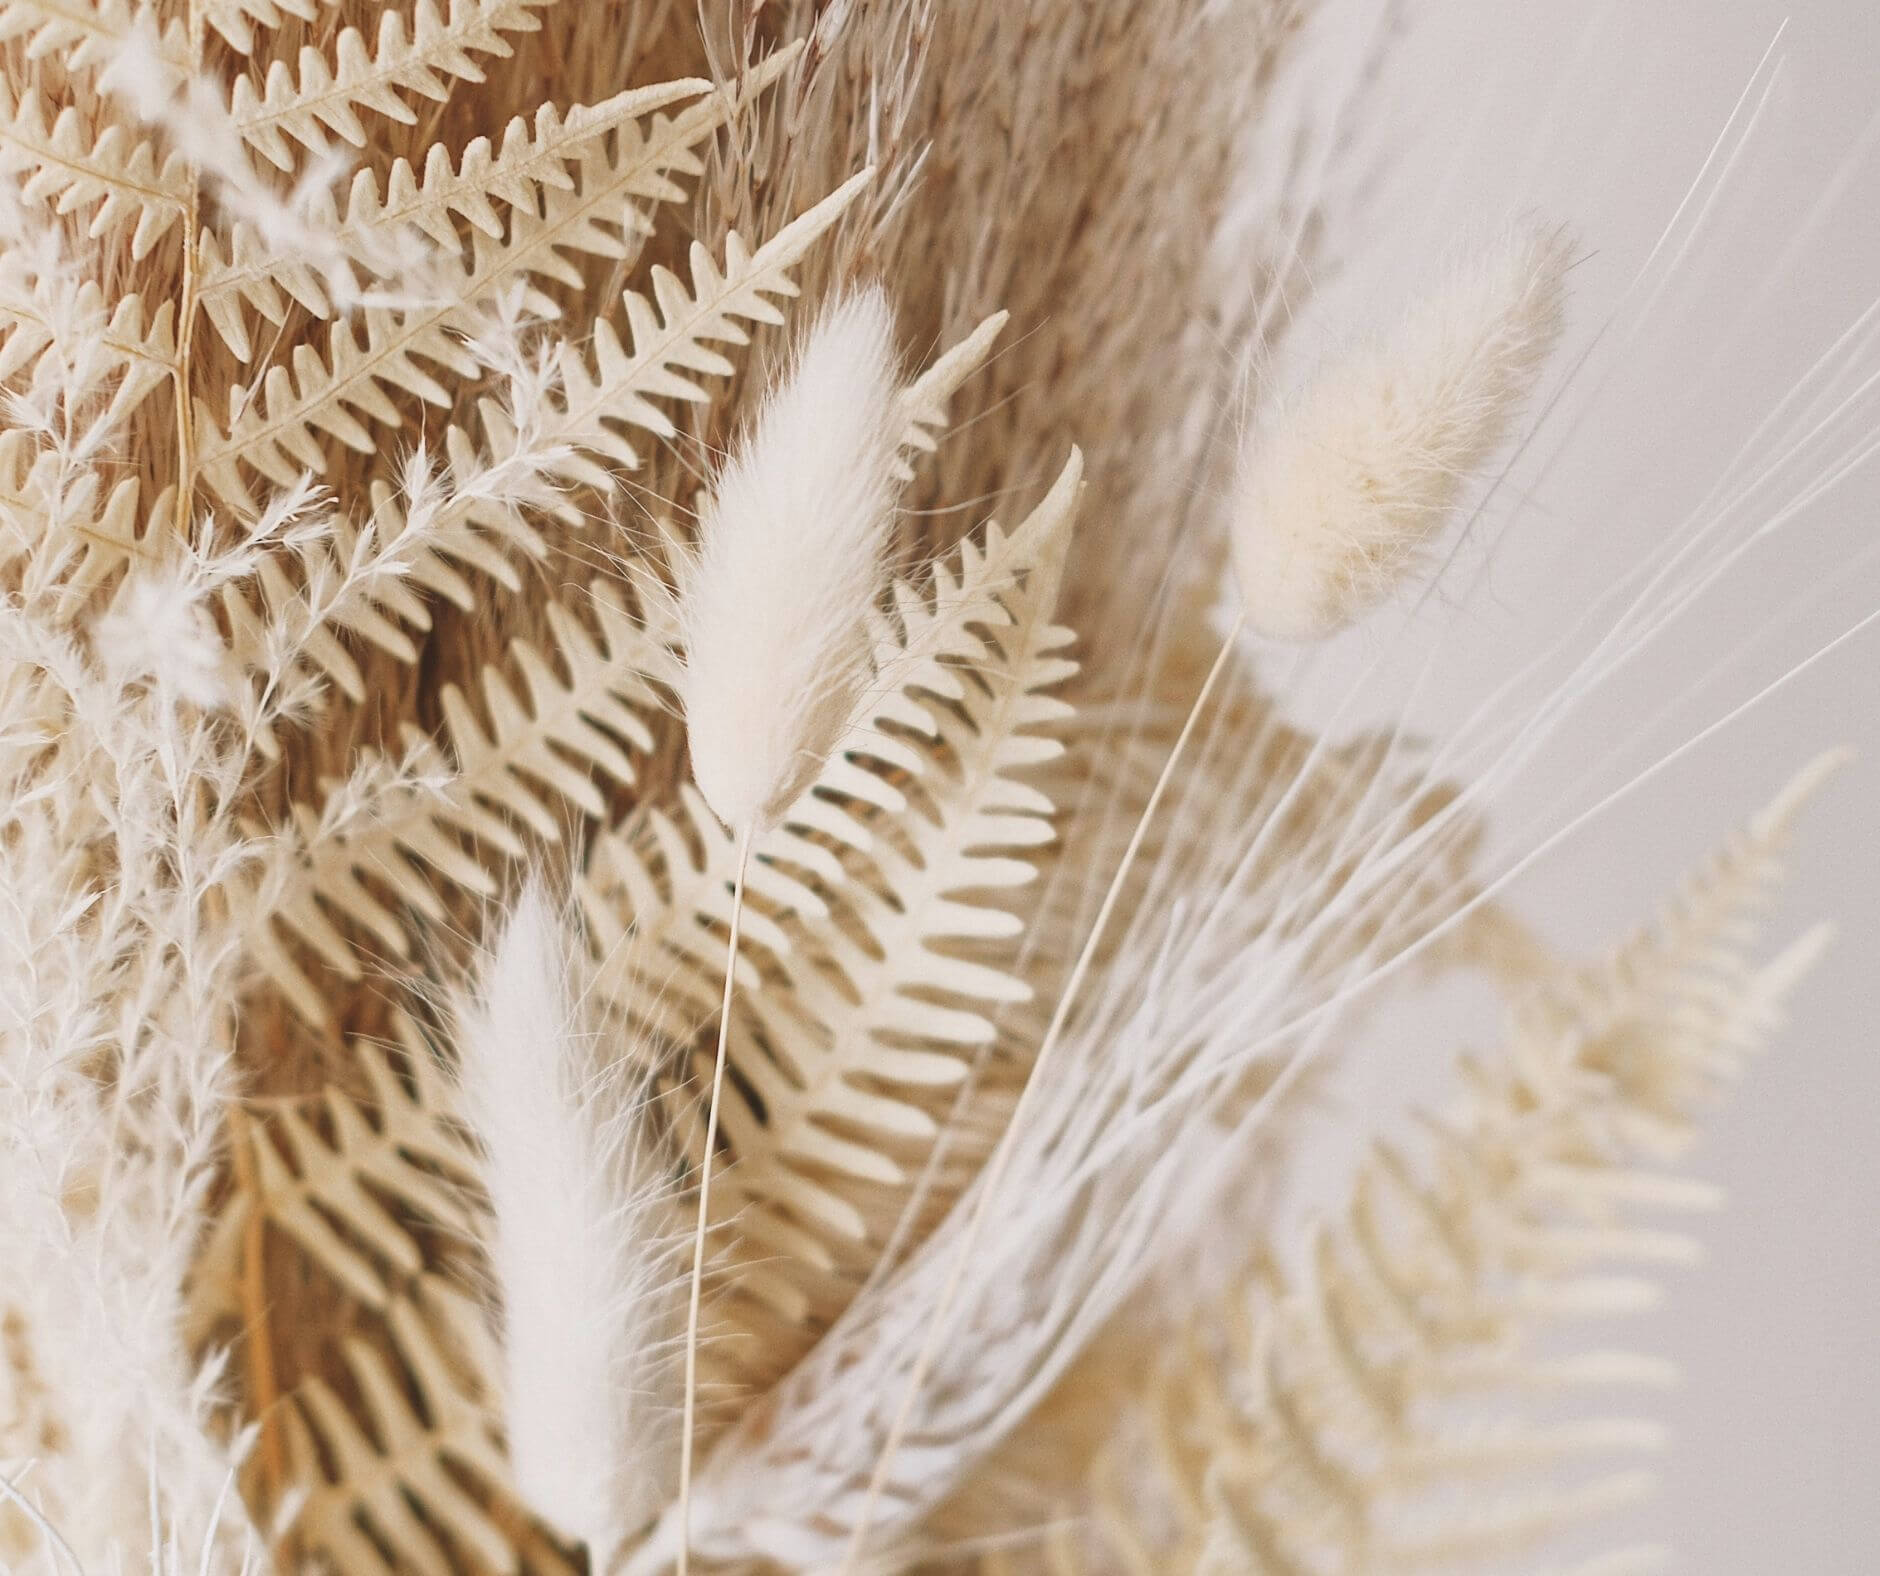 Close-up of a dried floral arrangement featuring pampas grass and fern leaves, curated by Studio Anansi.